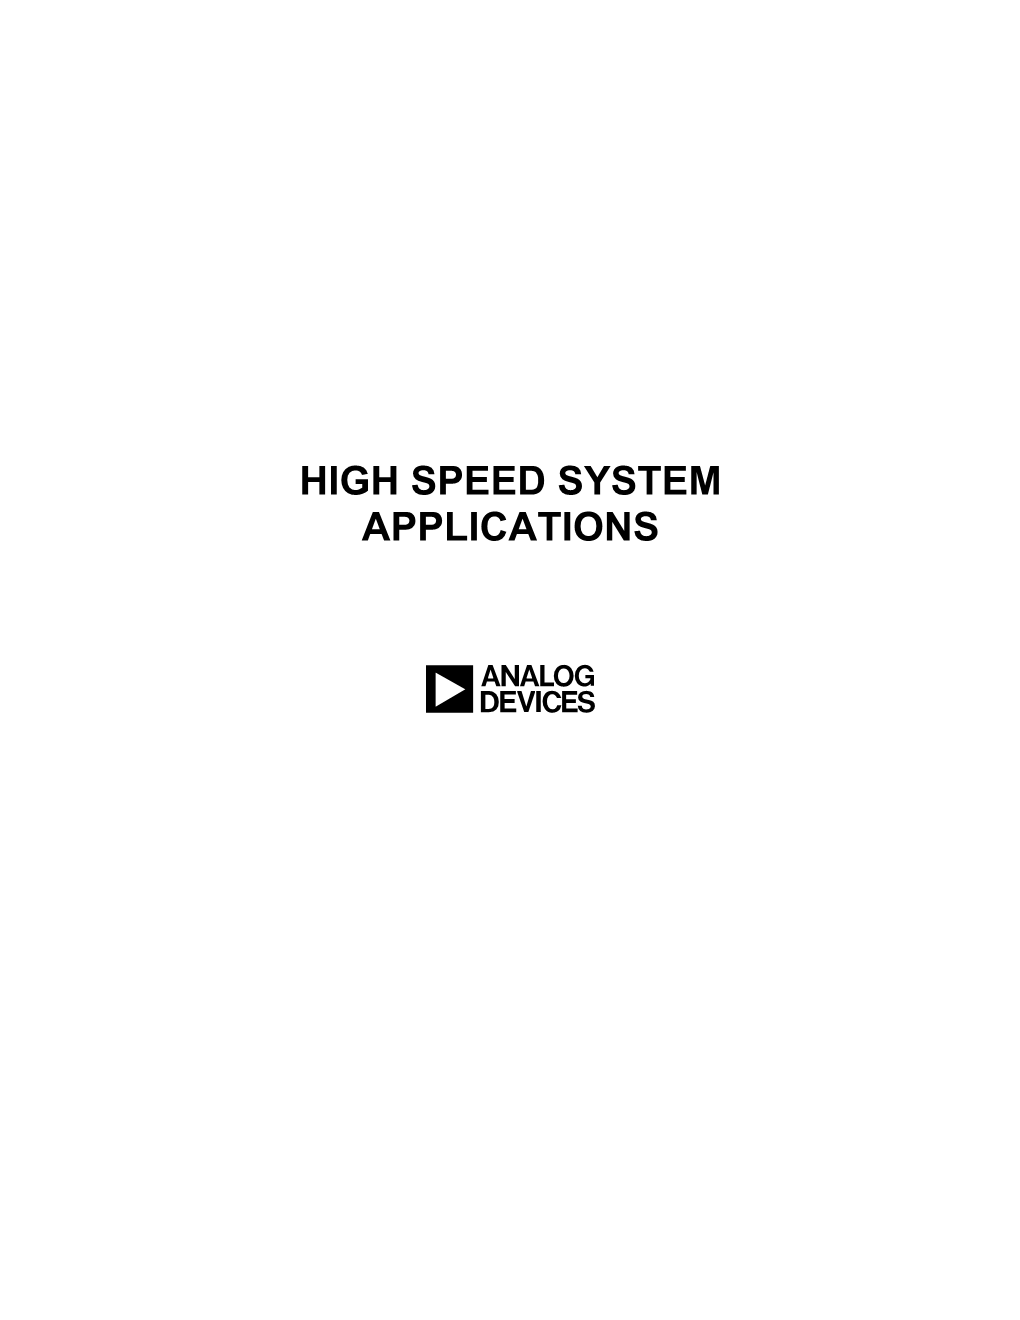 High Speed System Applications